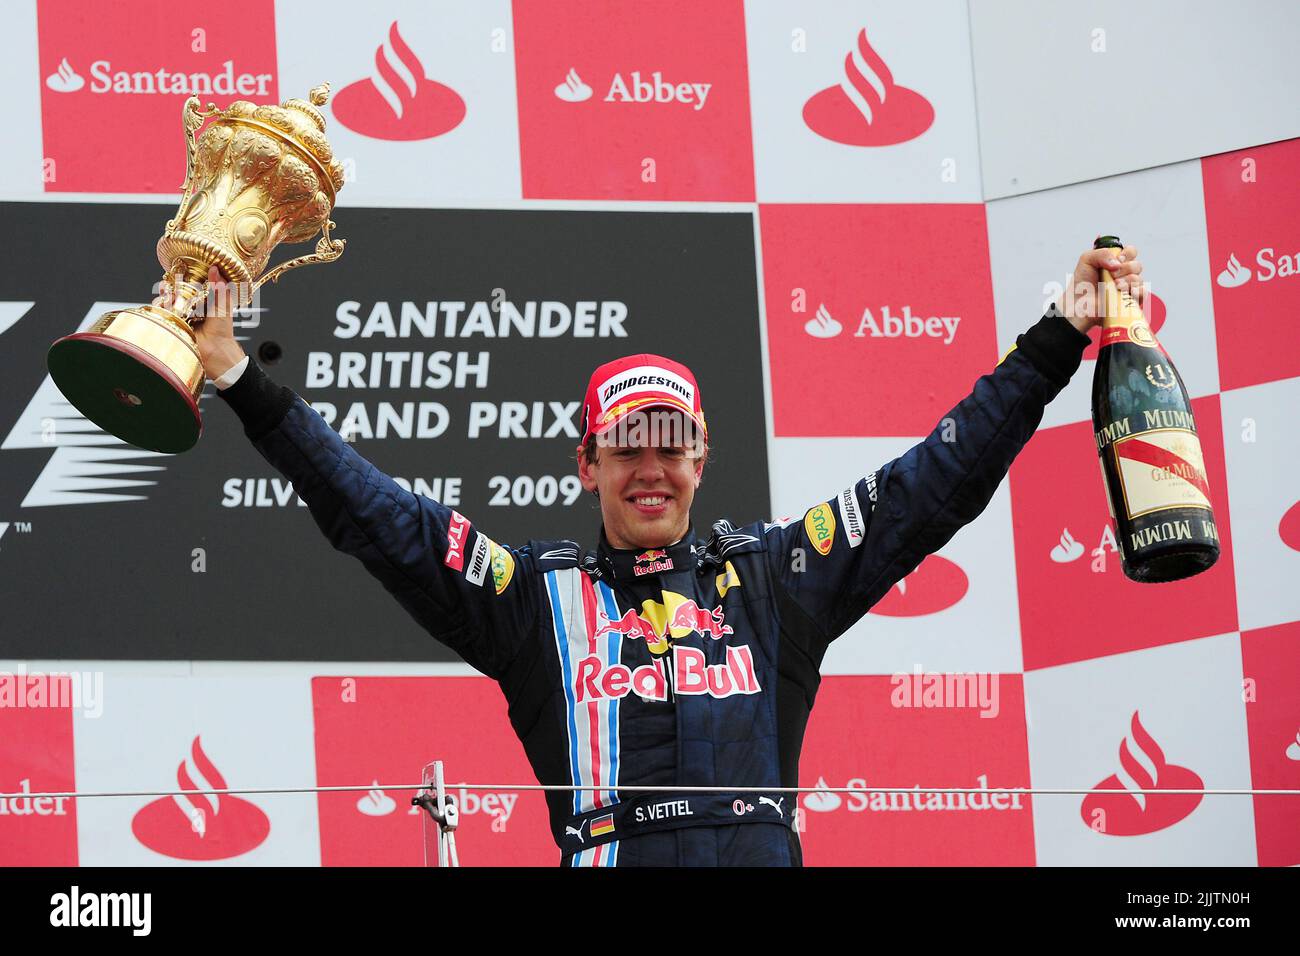 File photo dated 21-06-2009 of Red Bull Racing's Sebastian Vettel celebrates with the trophy after the British Grand Prix. Four-time world champion Sebastian Vettel has announced he will retire from Formula One at the end of the season. Issue date: Thursday July 28, 2022. Stock Photo